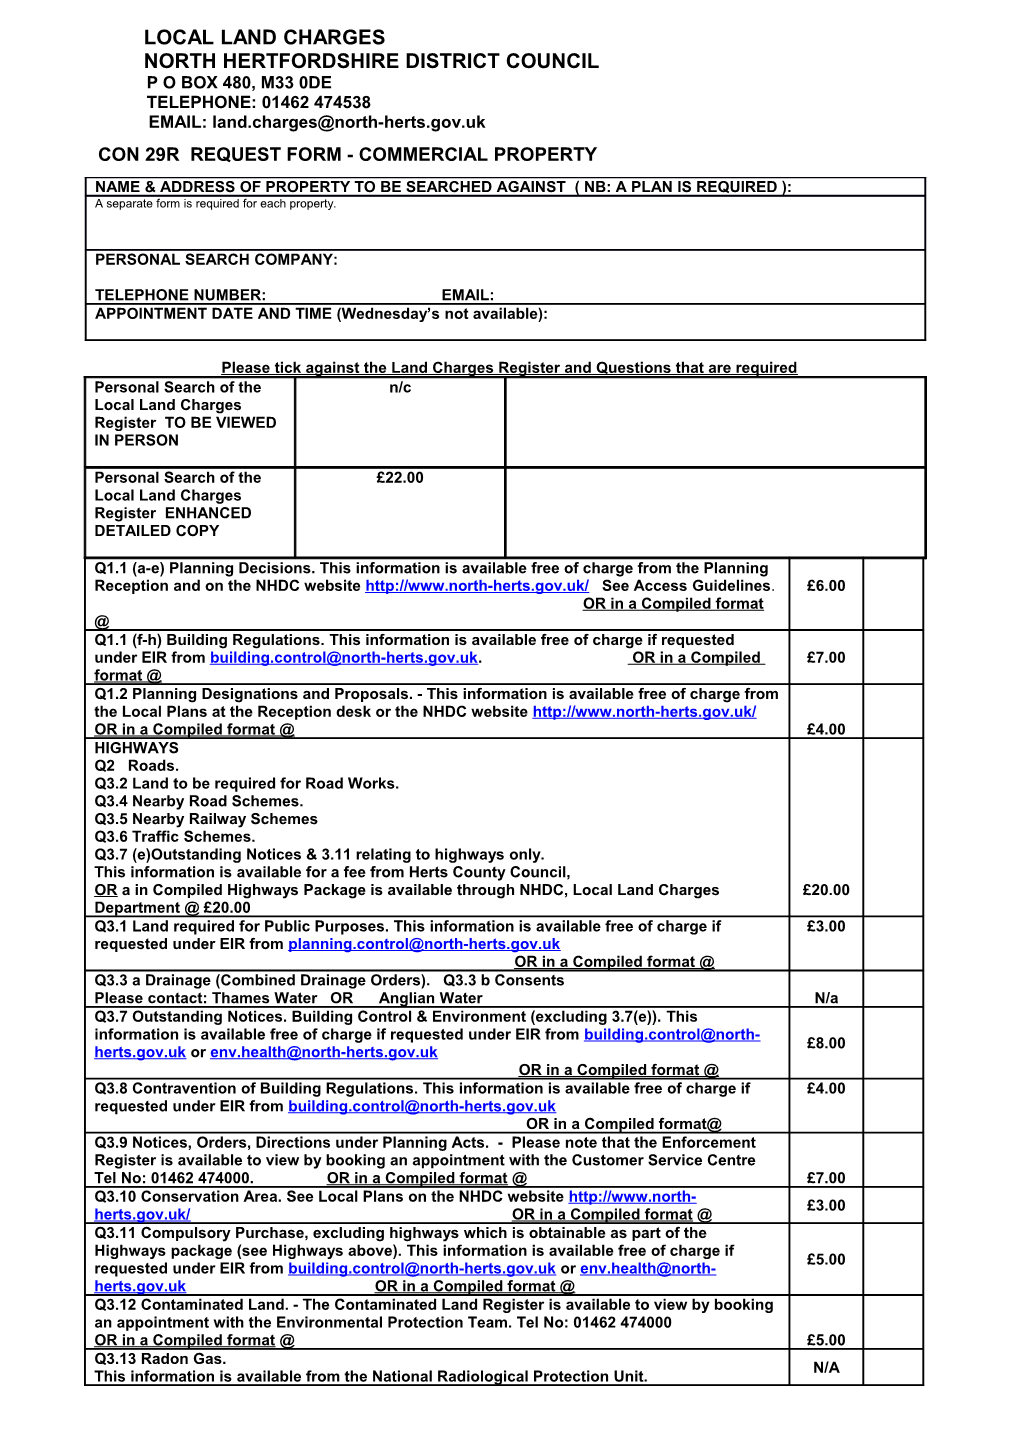 Con 29R Request Form - Commercial Property